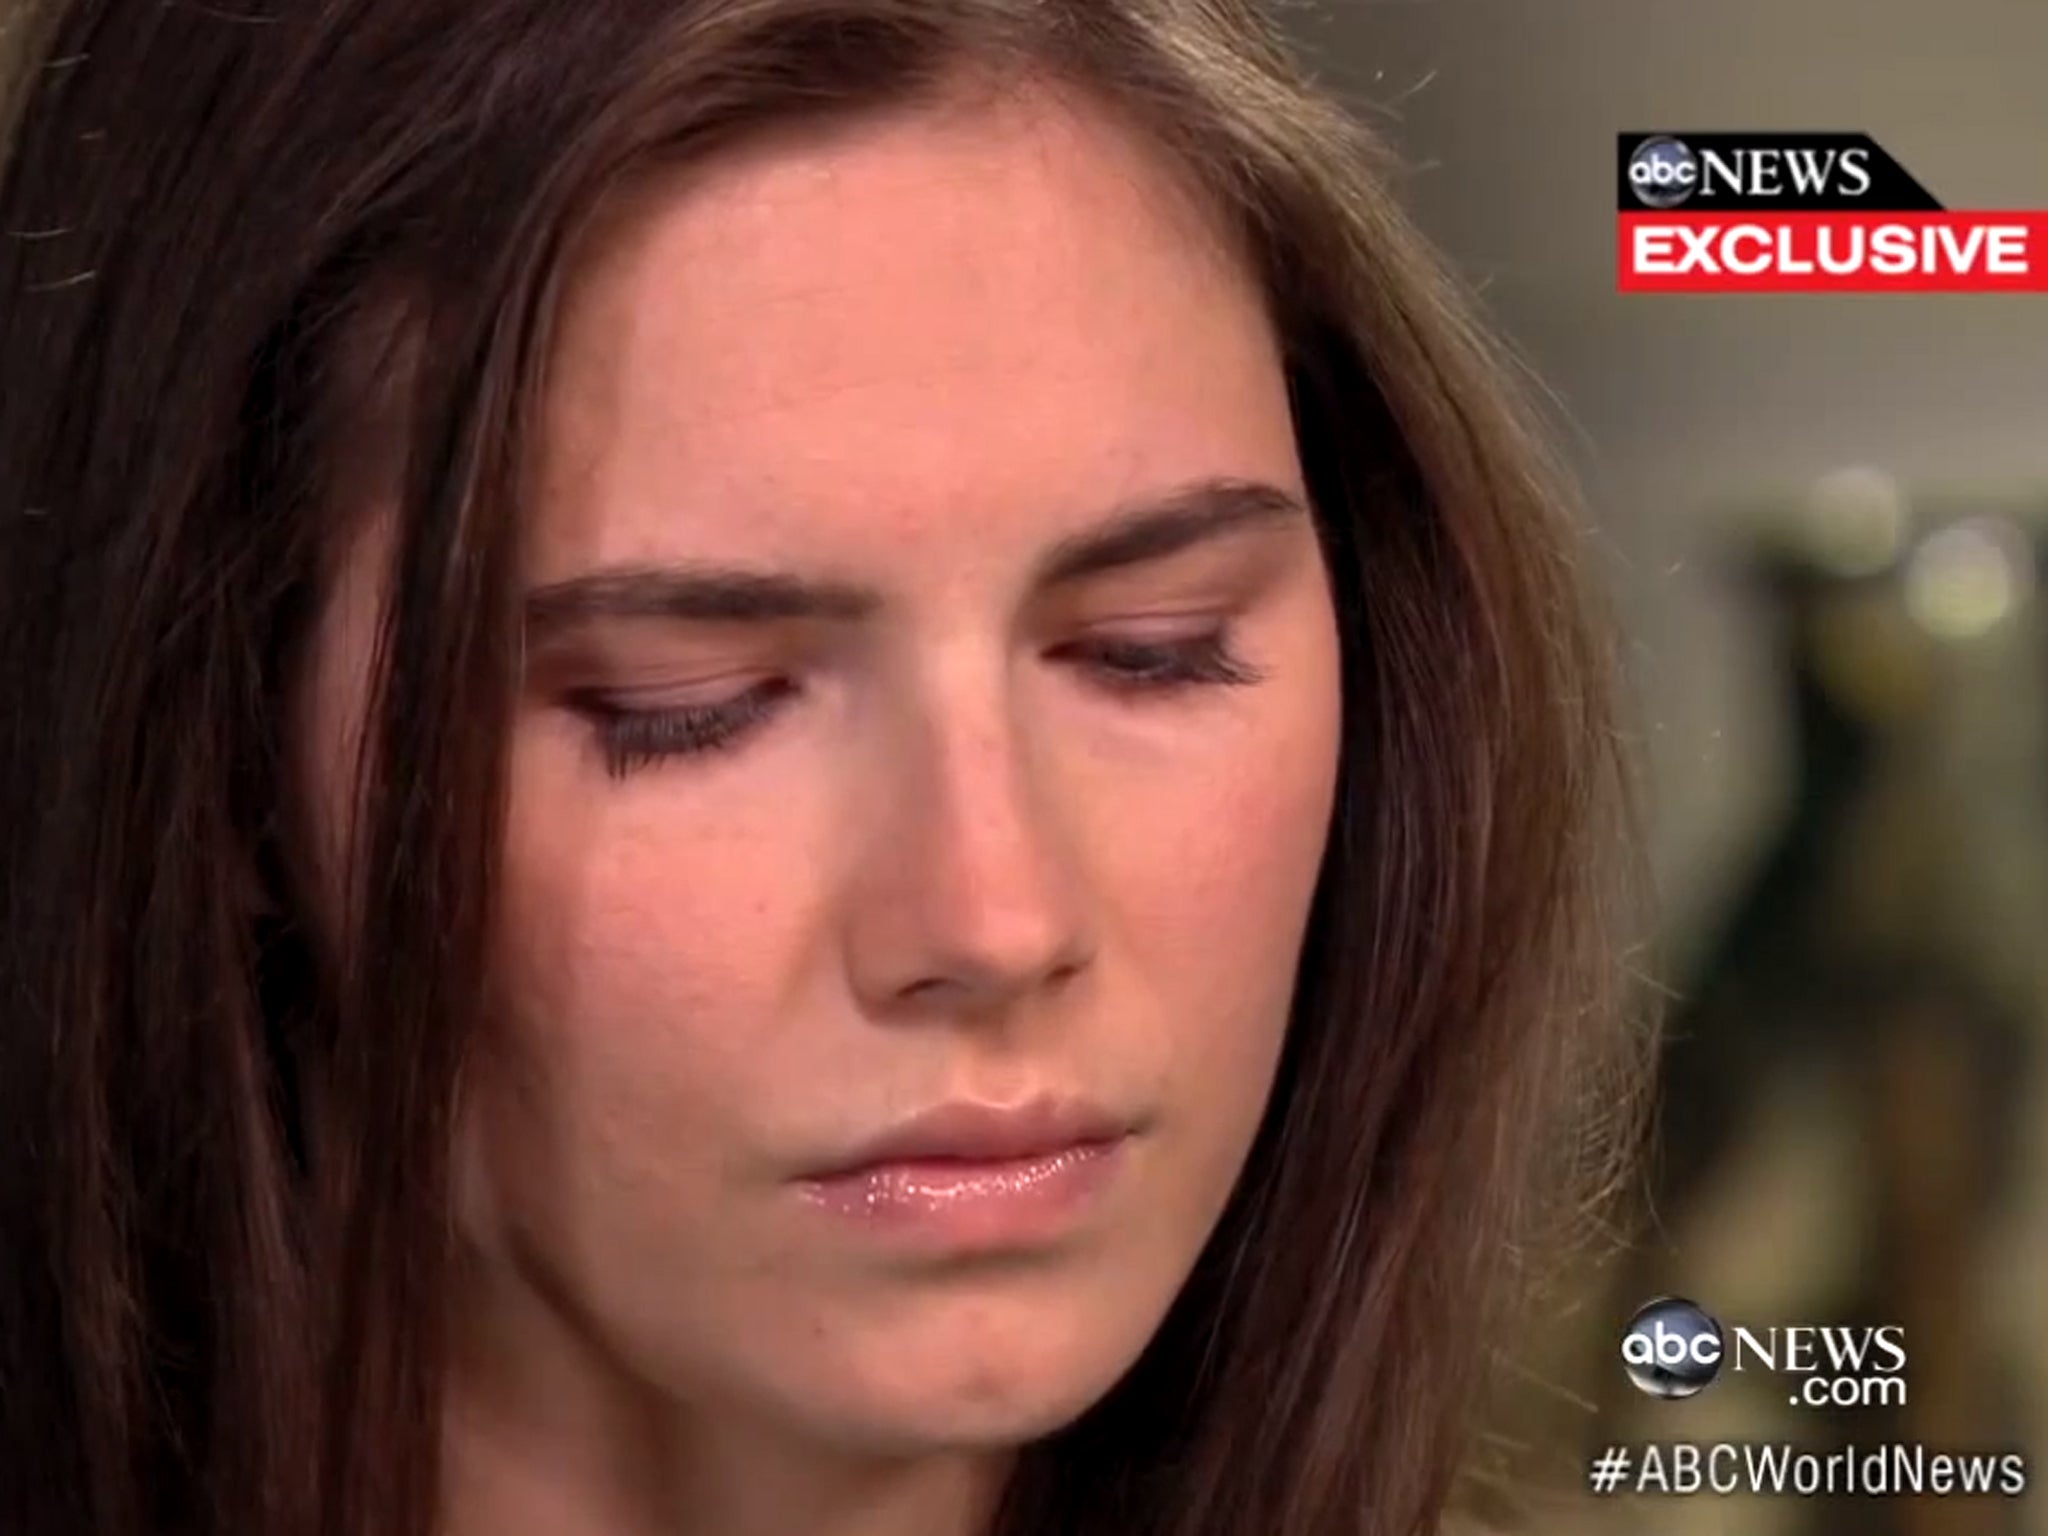 Amanda Knox gave her first TV interview with ABC News